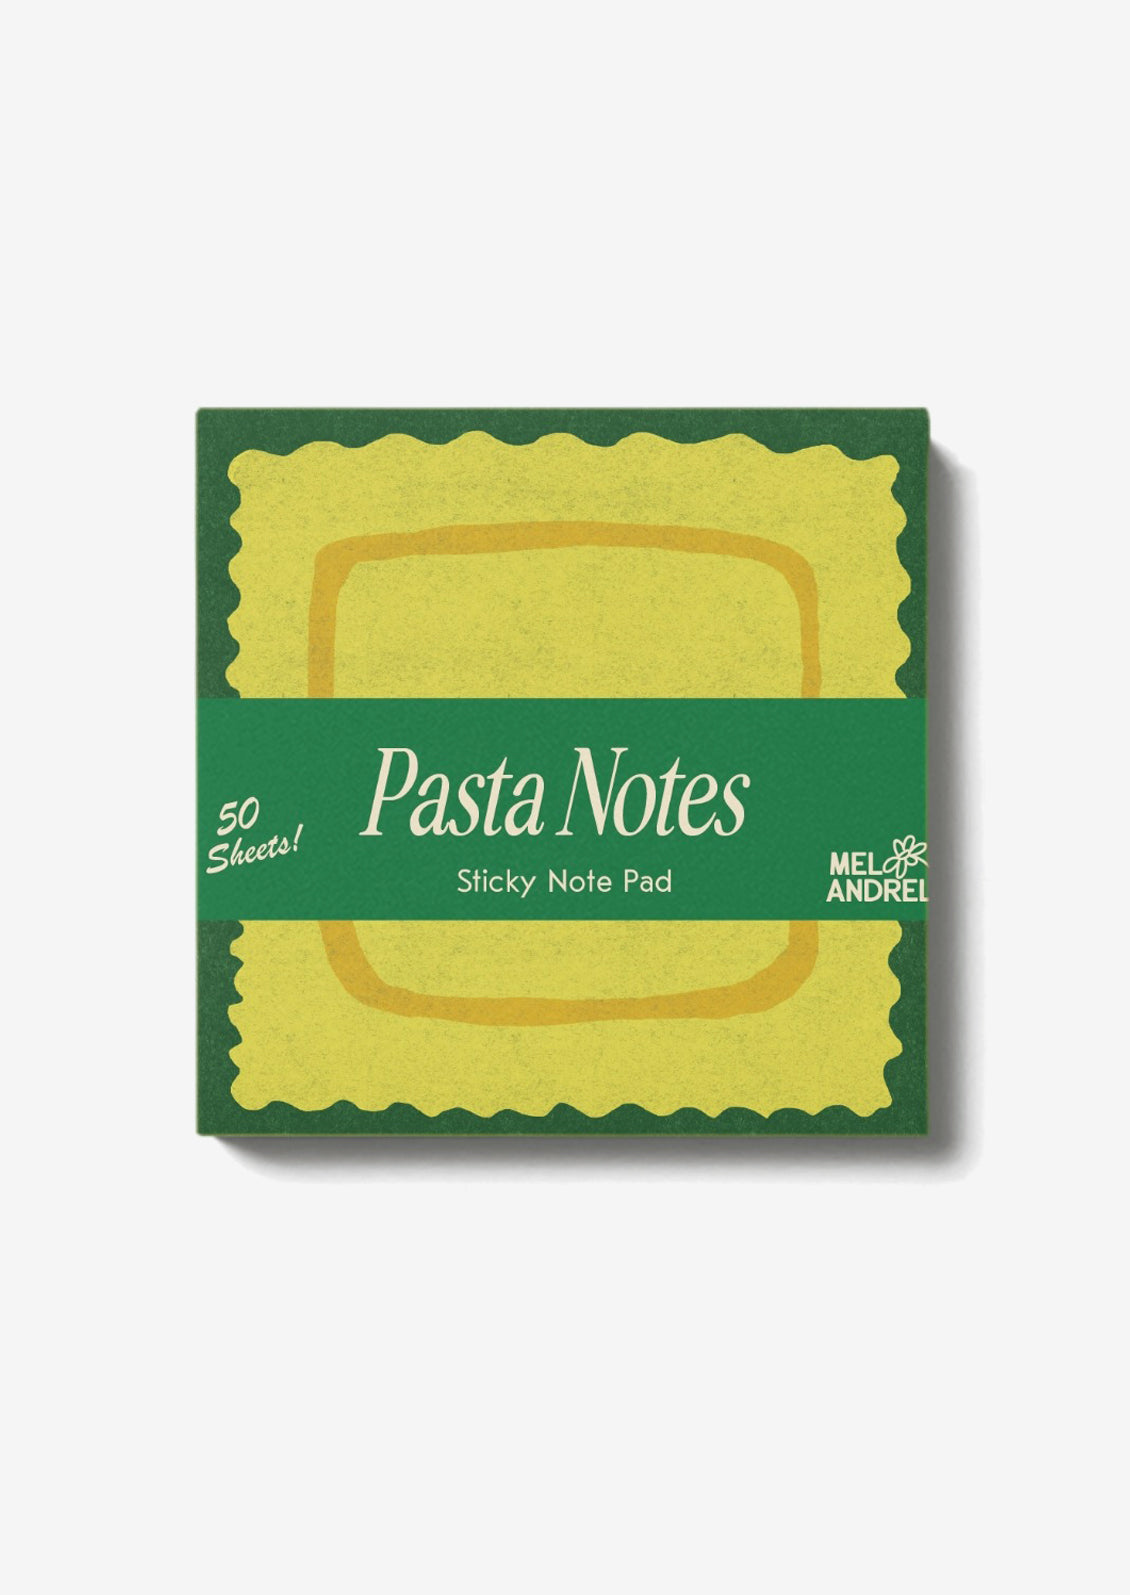 A stack of sticky notes with printed pasta theme.